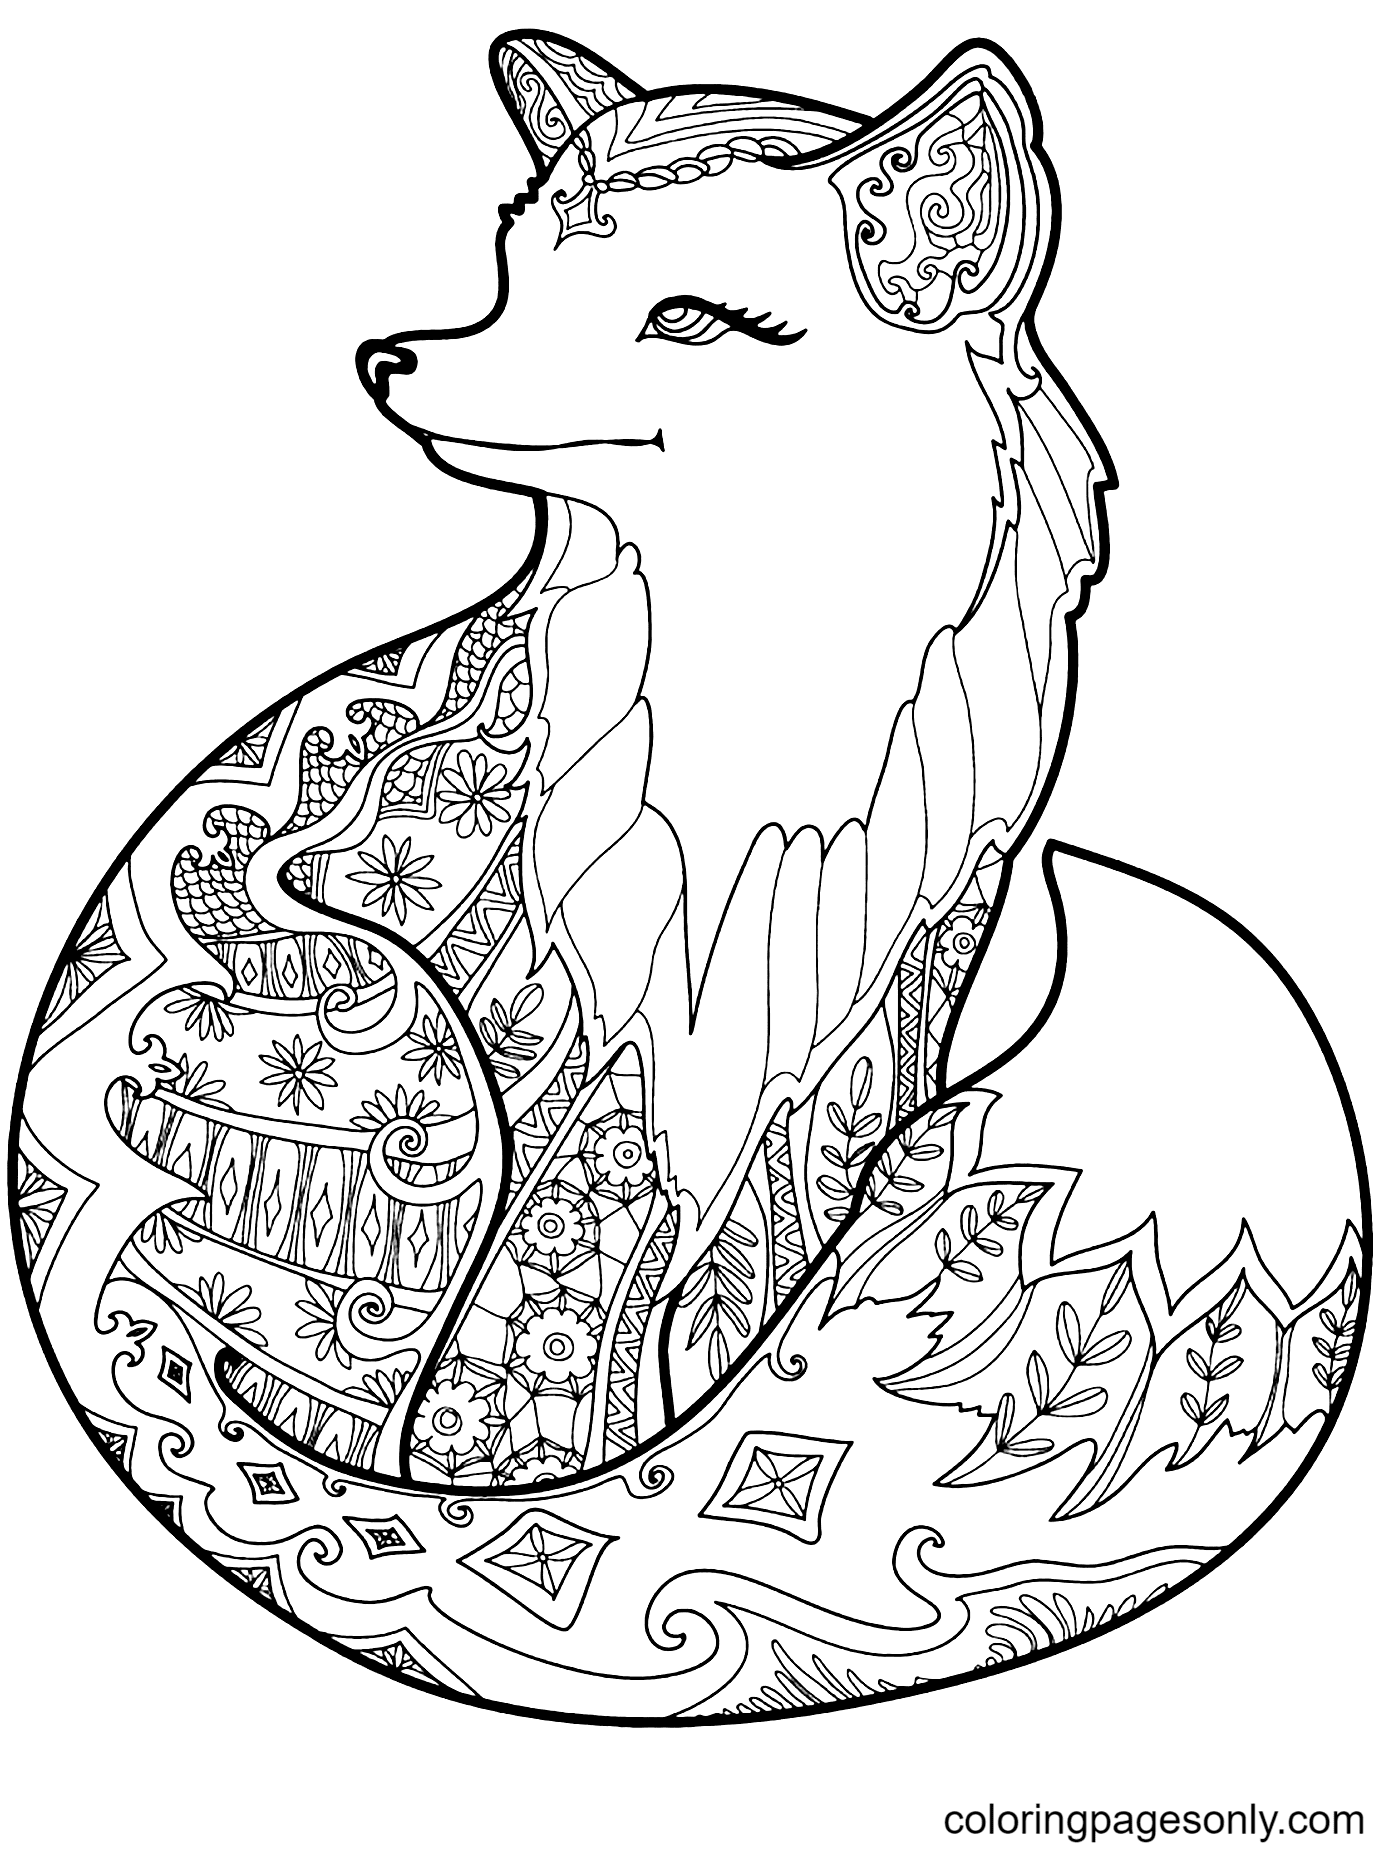 Fox with Beautiful Patterns Coloring Pages